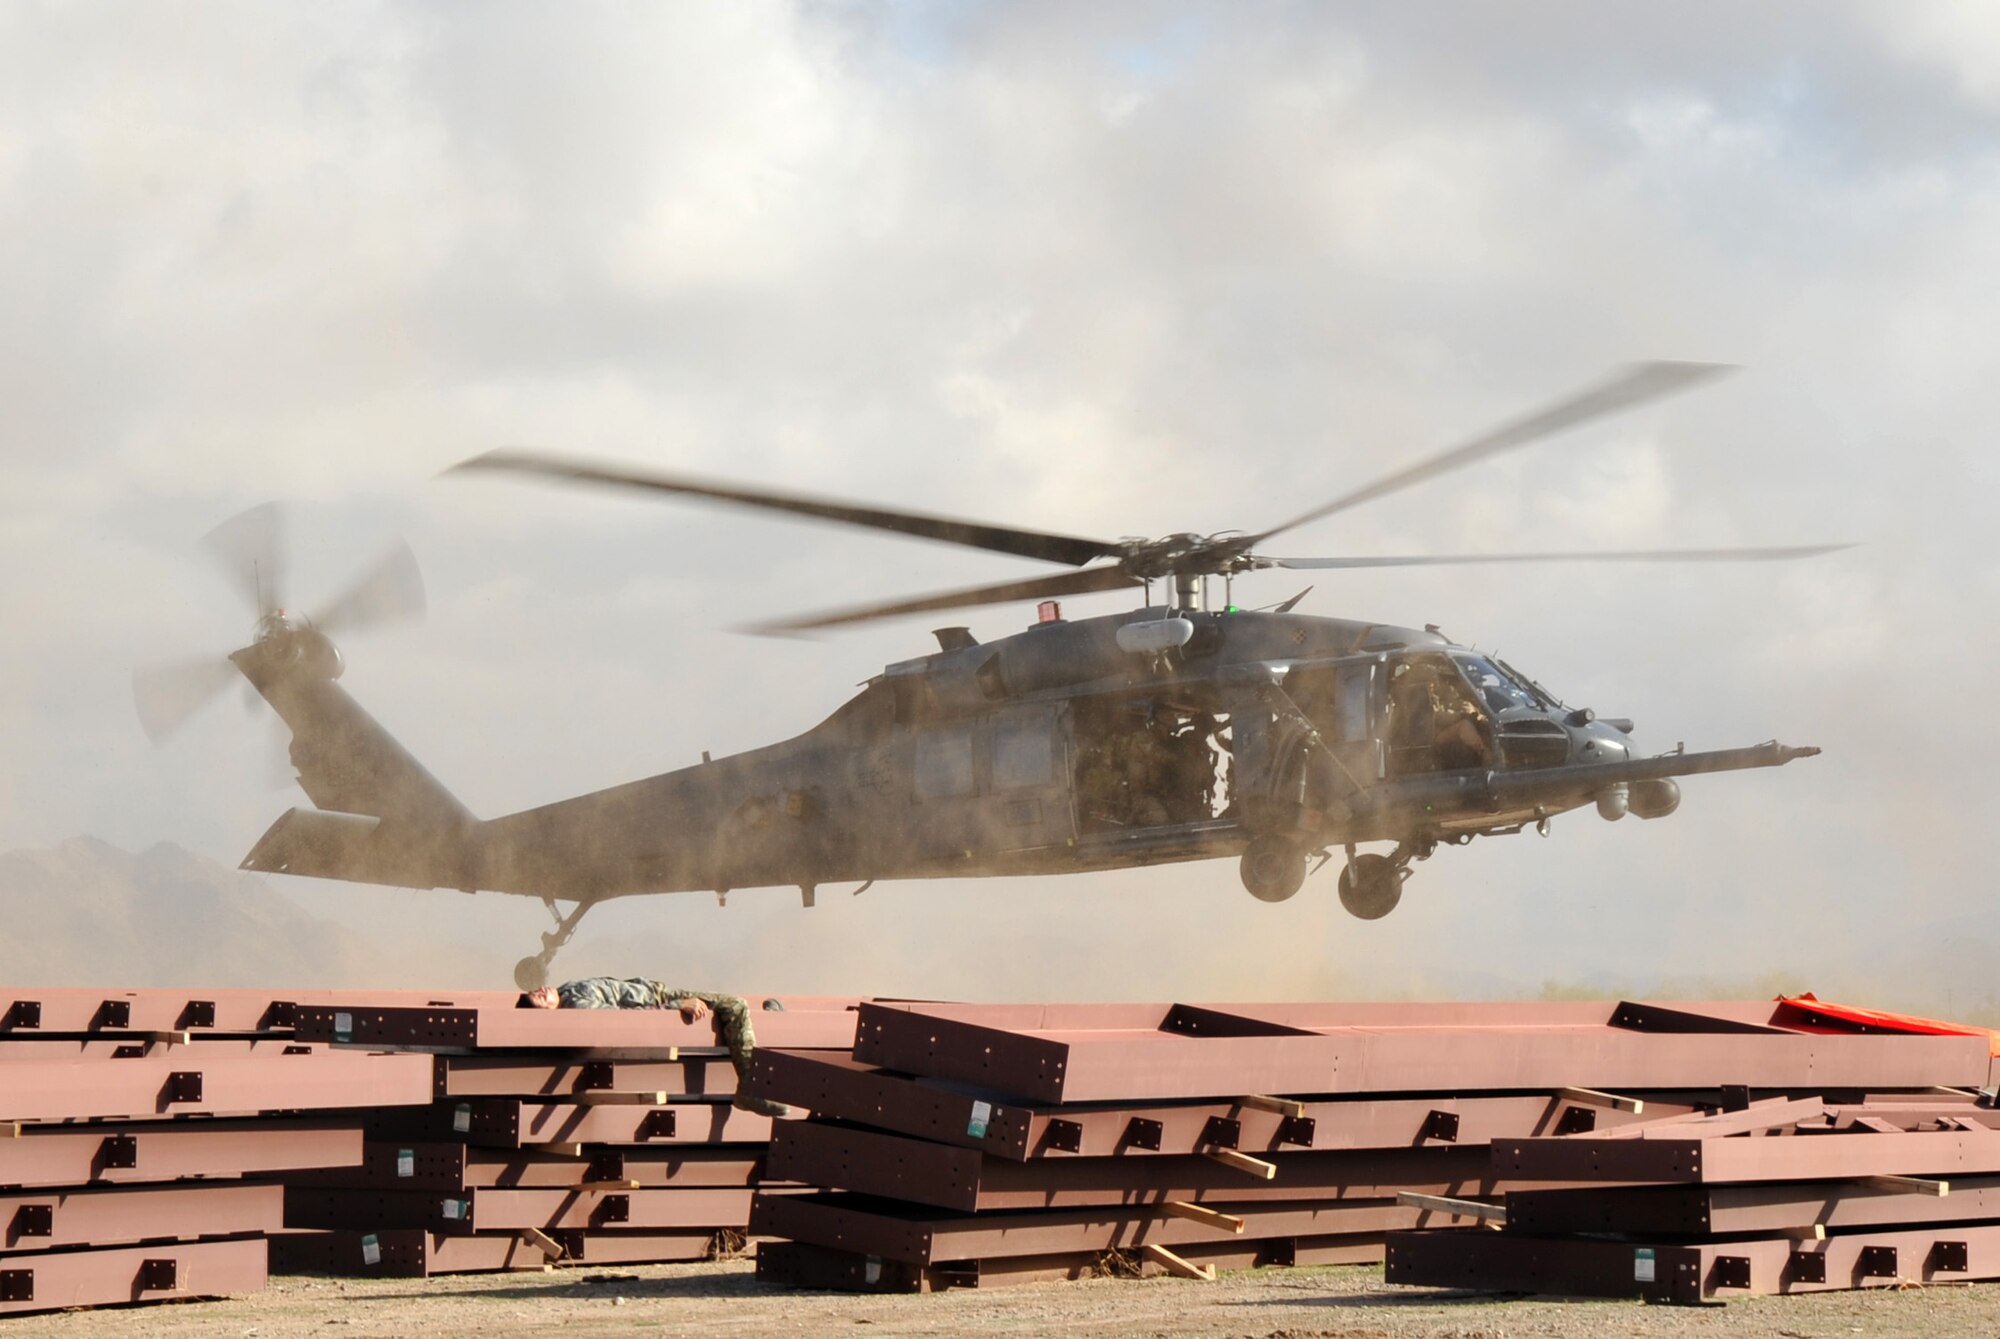 An HH-60G Pave Hawk helicopter with the 943rd Rescue Group prepares to land and drop off pararesucemen during a mass causality drill during Operation Shocker training exercise. The exercise tested the 943rd Rescue Group’s ability to respond to a variety of combat-search-and-rescue scenarios prior to an upcoming deployment. (U.S. Air Force photo/ Master Sgt. Luke Johnson)